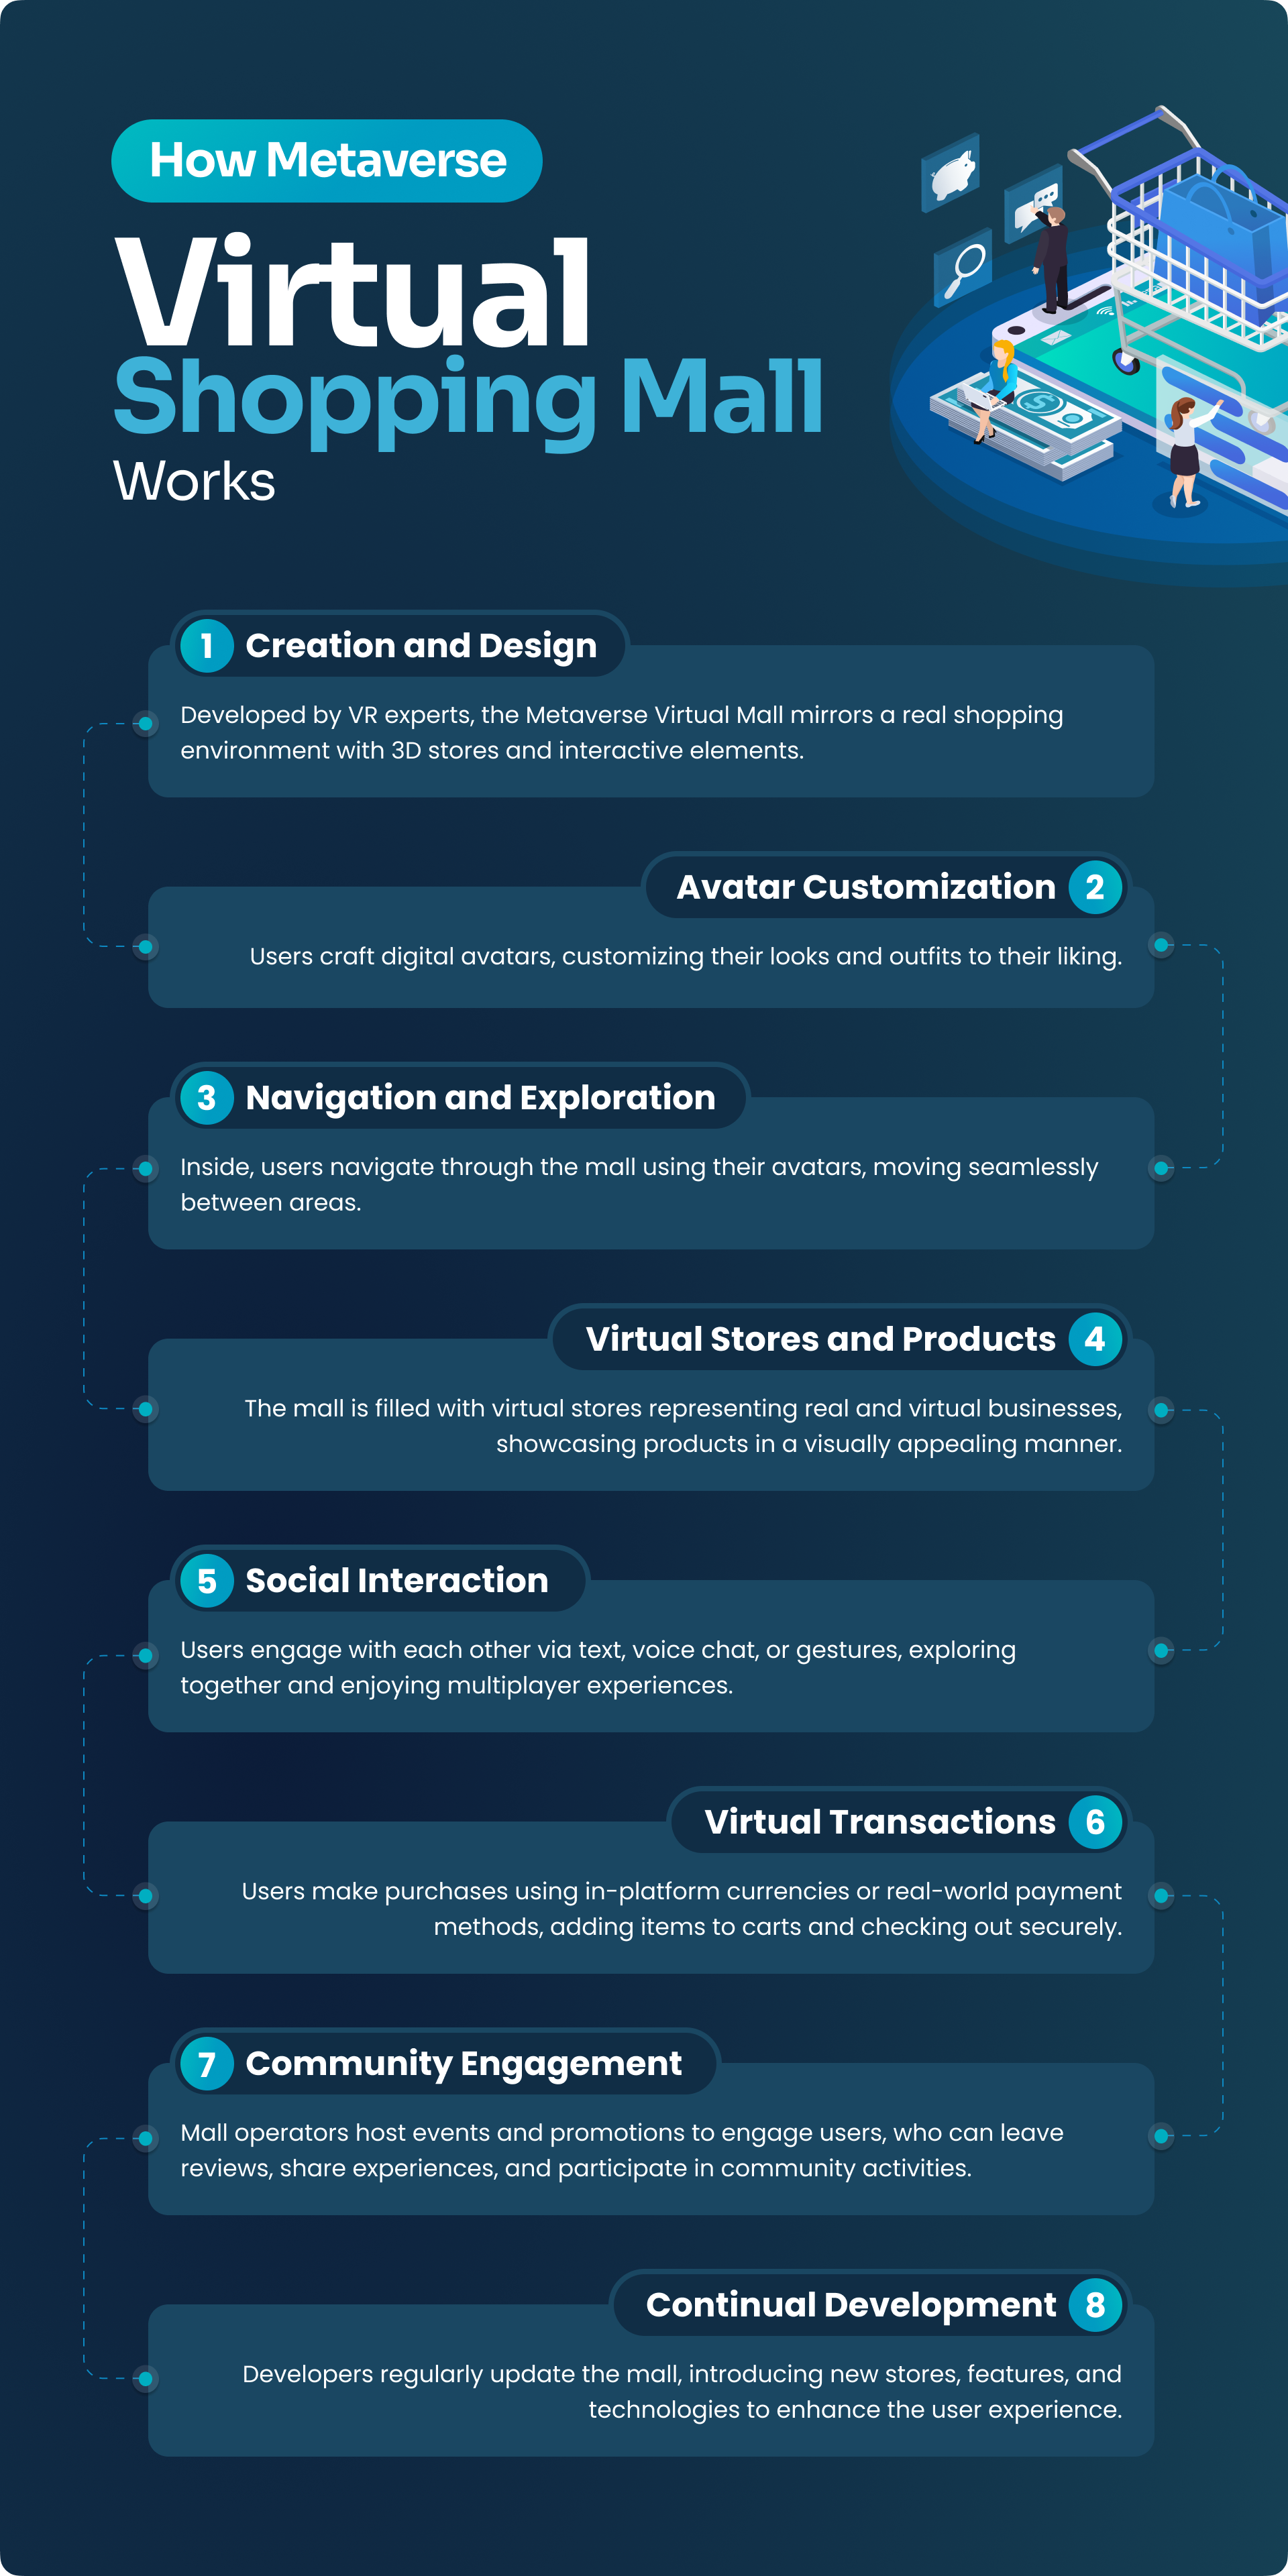 How Metaverse Virtual Shopping Mall Works